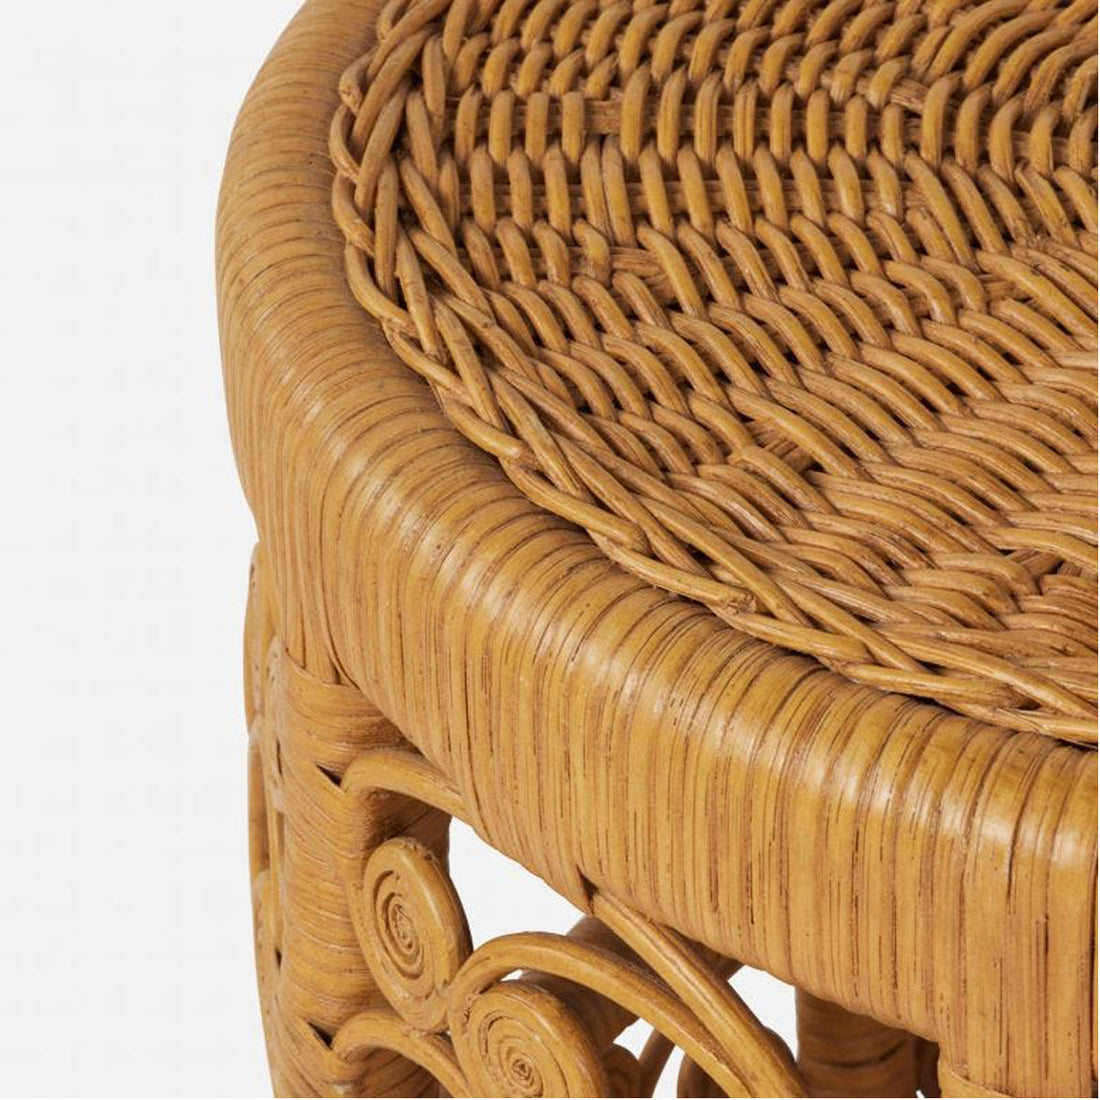 Made Goods Maybelle Curlicue Wicker Barrel Stool